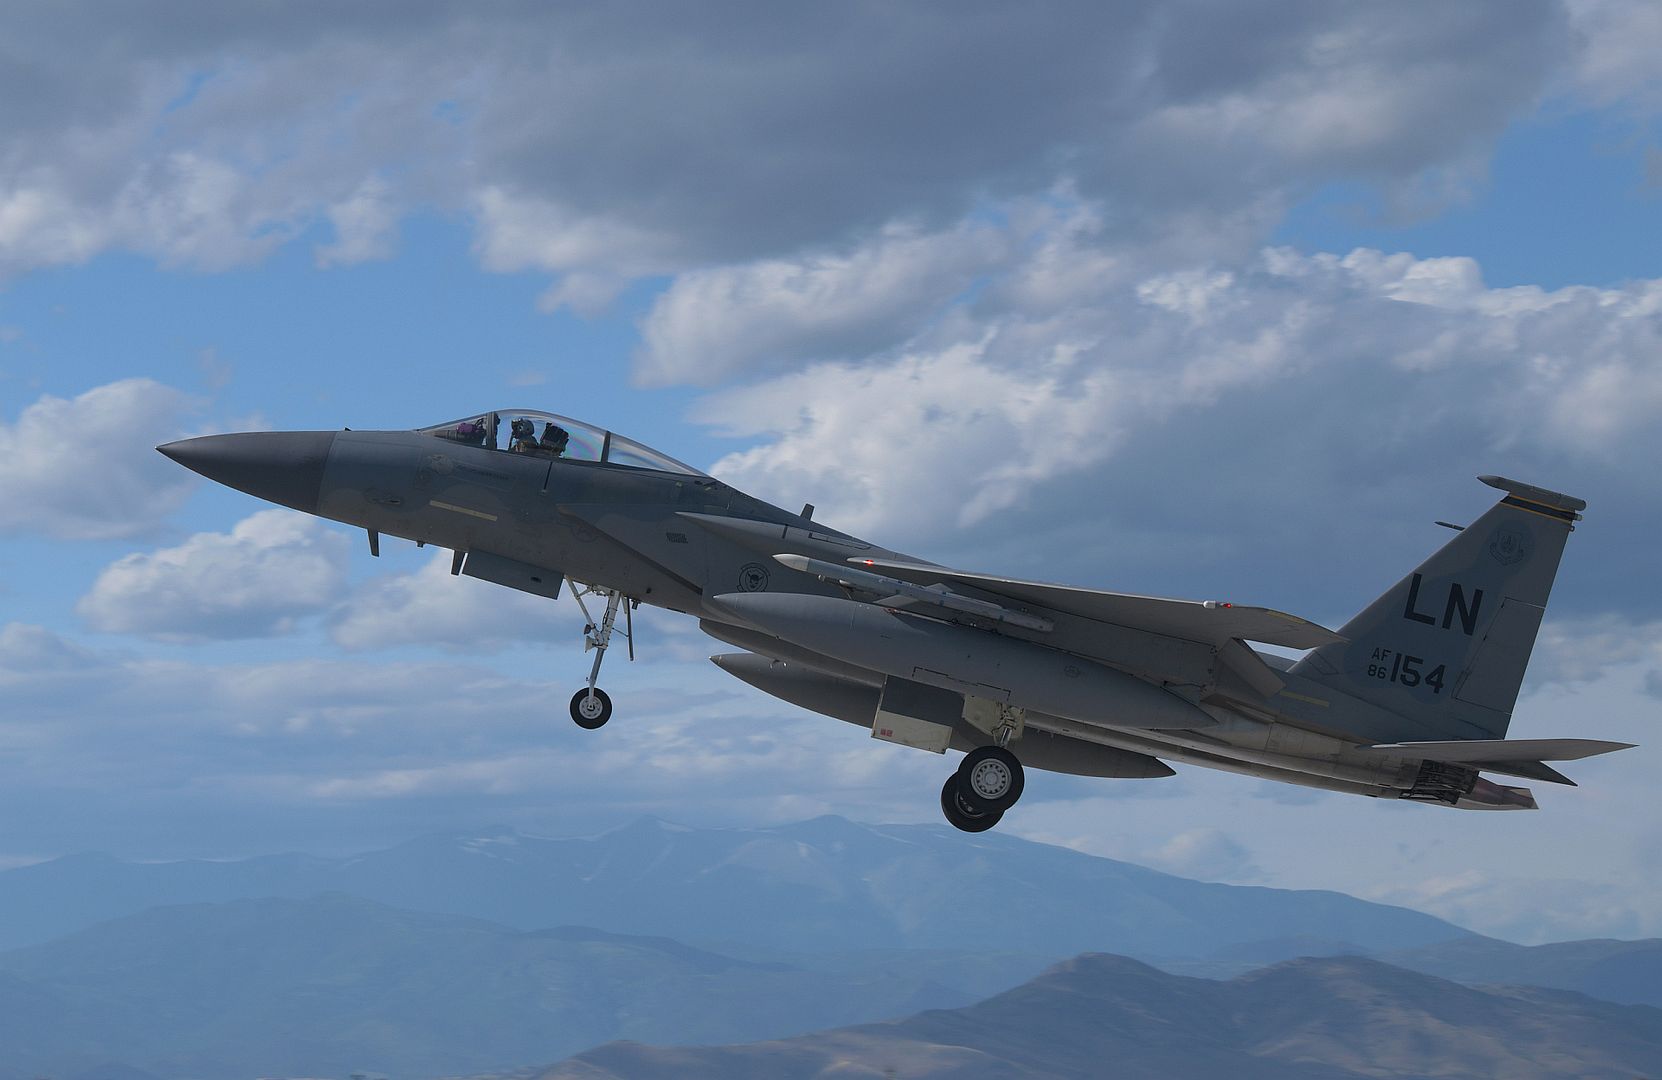 15C Eagle Assigned To The 493rd Fighter Squadron Takes Off During Exercise Astral Knight 21 At Larissa Air Base Greece May 17 2021